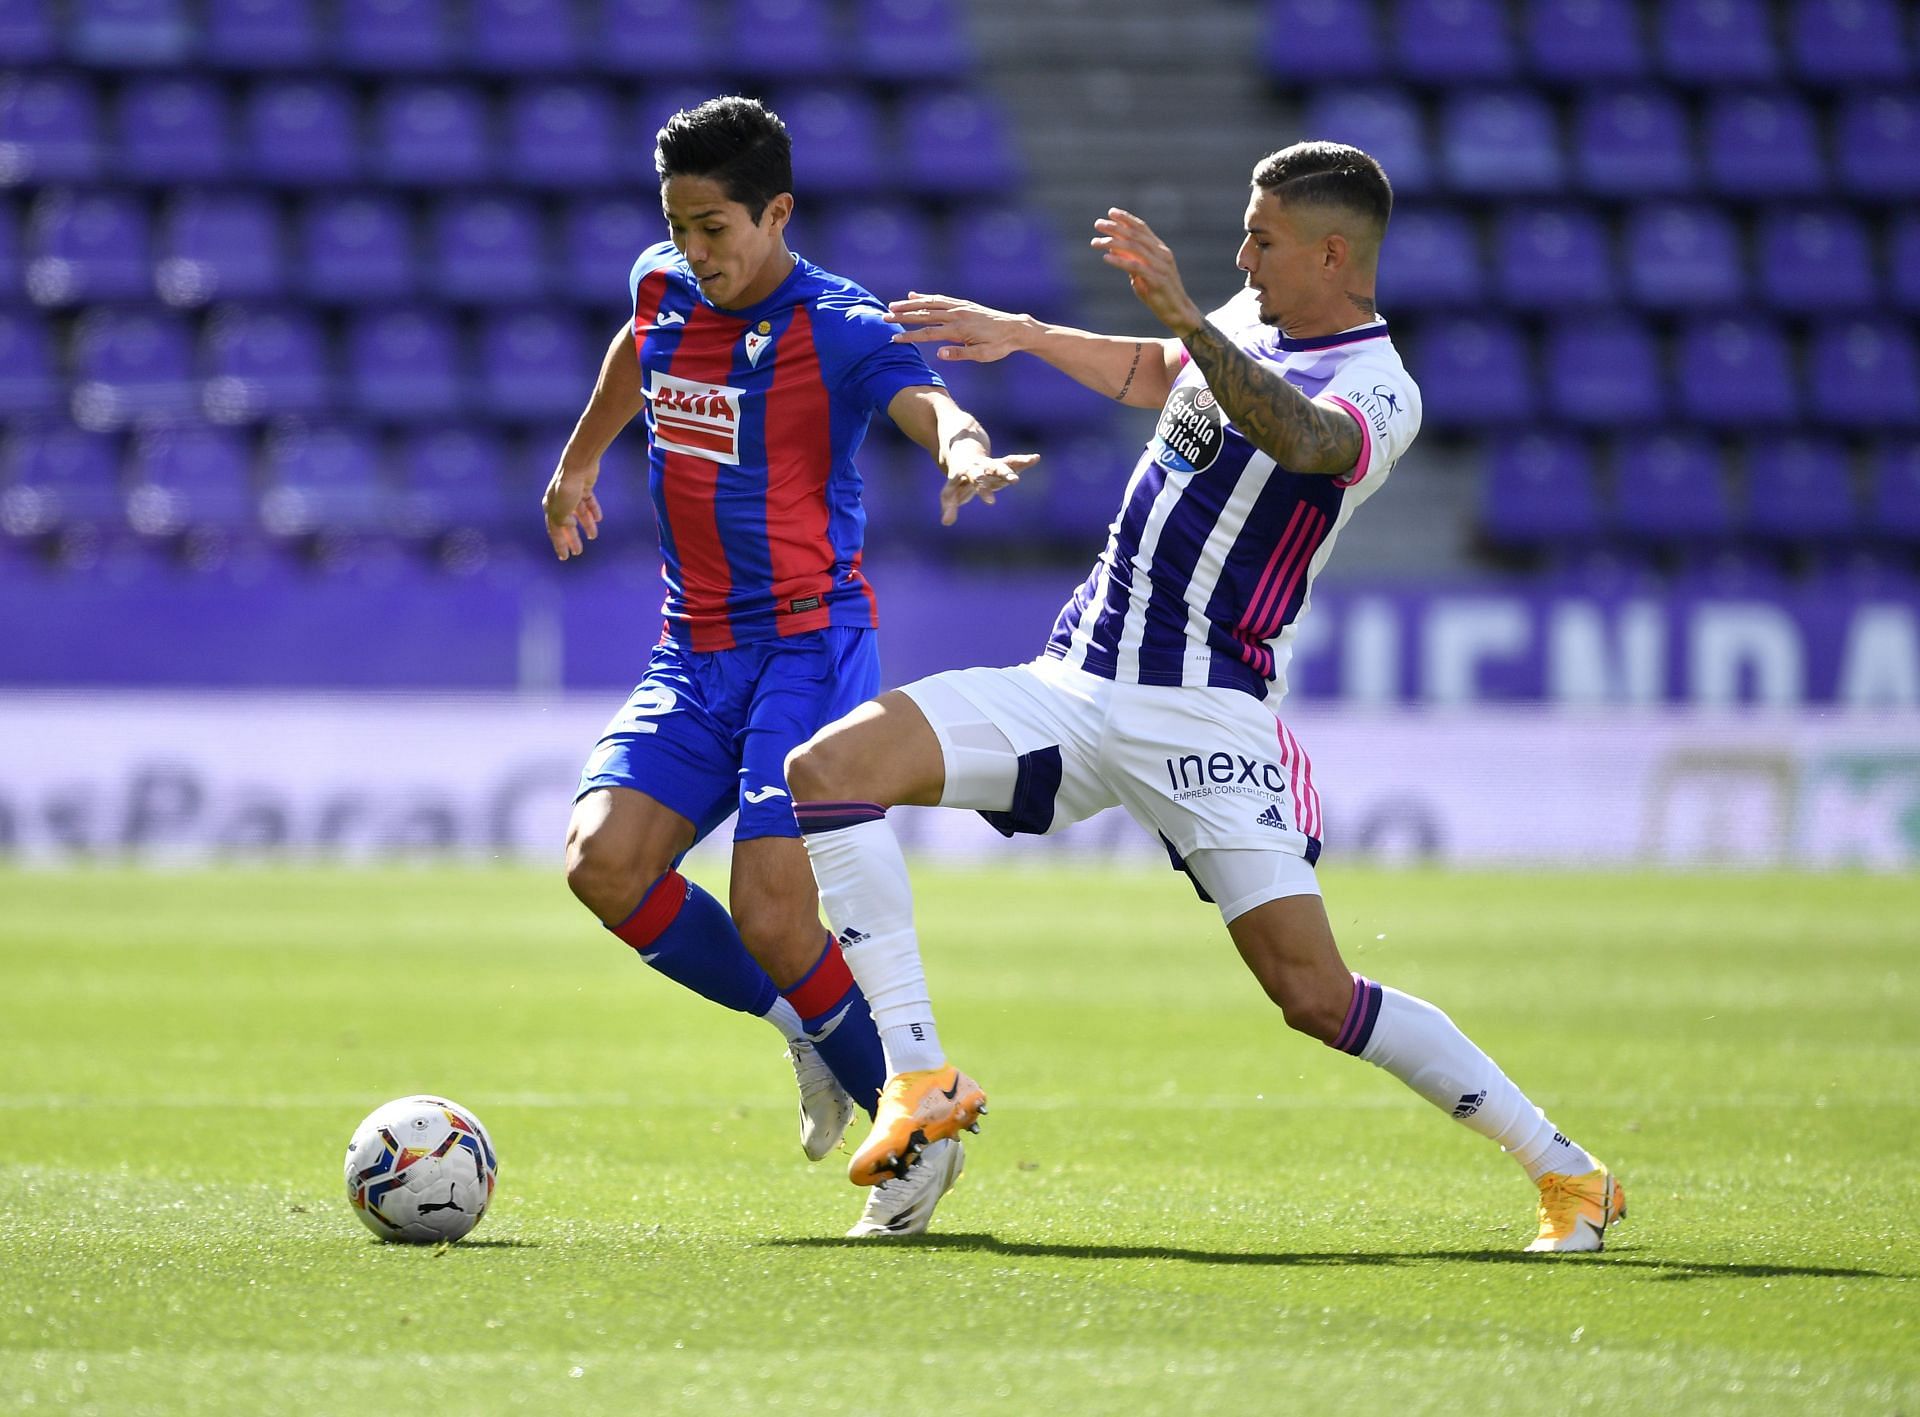 Javi Sanchez will miss the game for Real Valladolid against Lugo on Saturday due to suspension